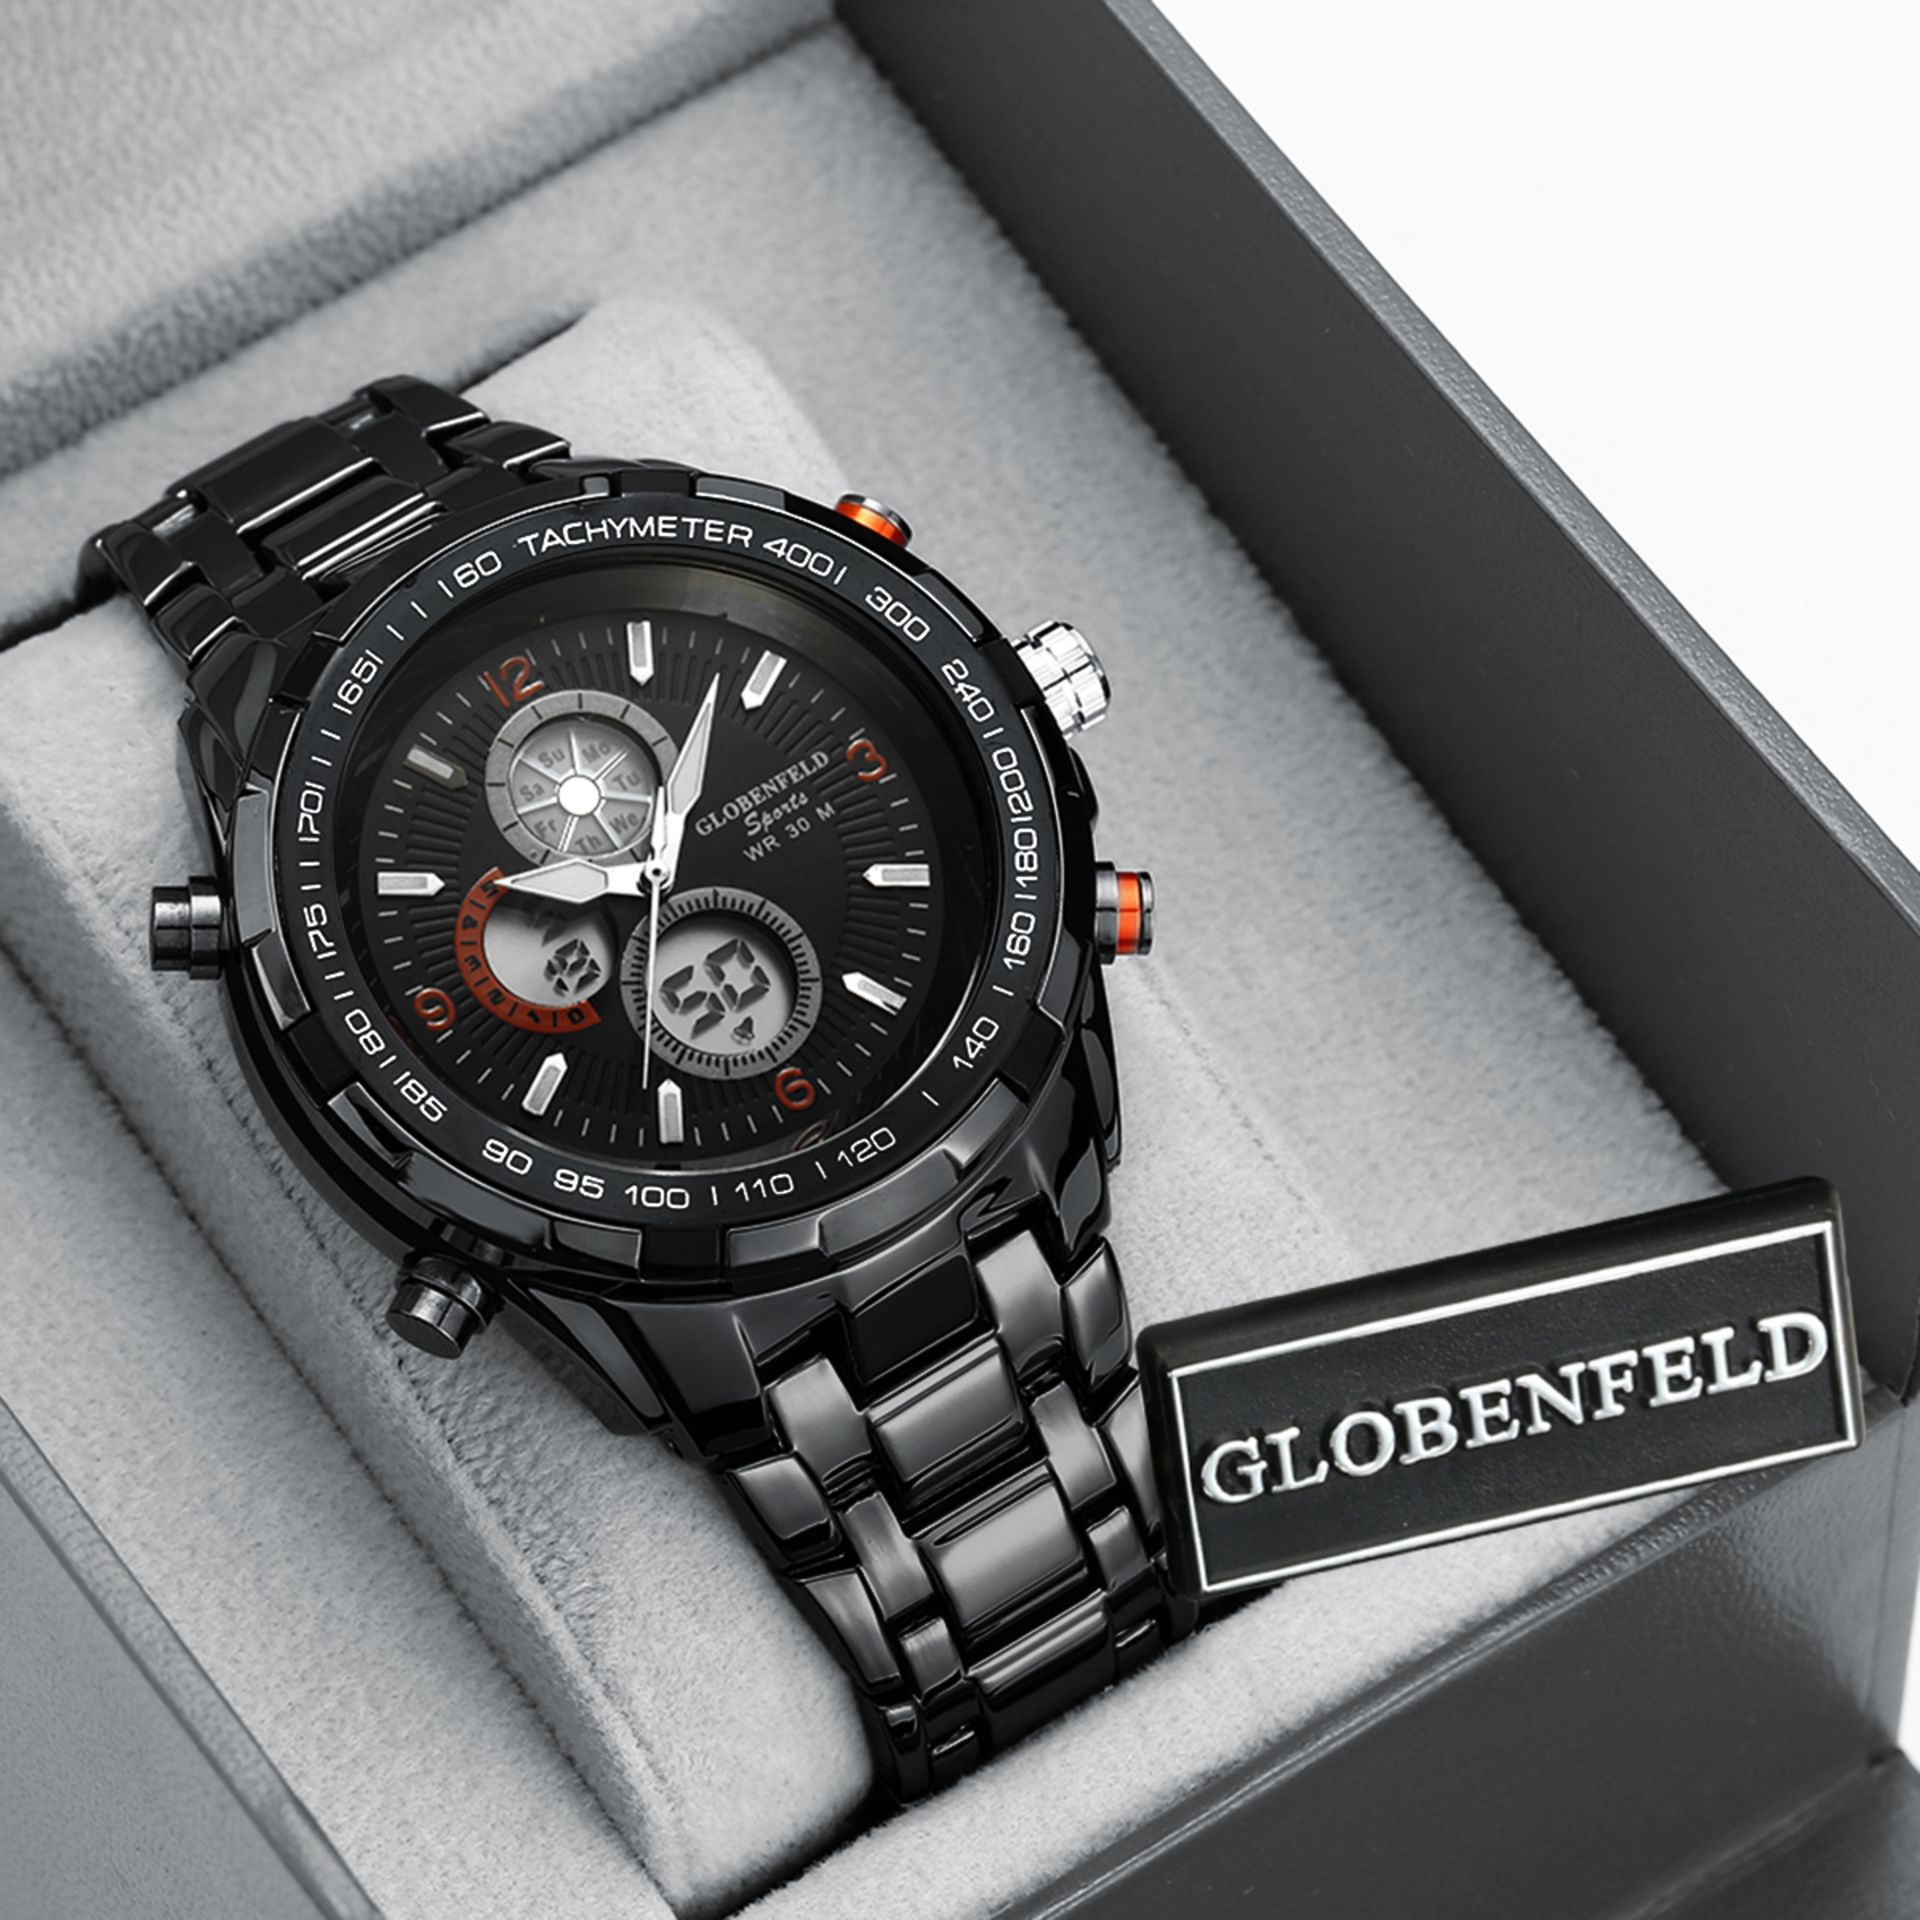 1 BRAND NEW BOXED GLOBENFELD SPORTS V.12 WATCH IN BLACK RRP £199.99 COMES WITH 5 YEAR WARRANTY